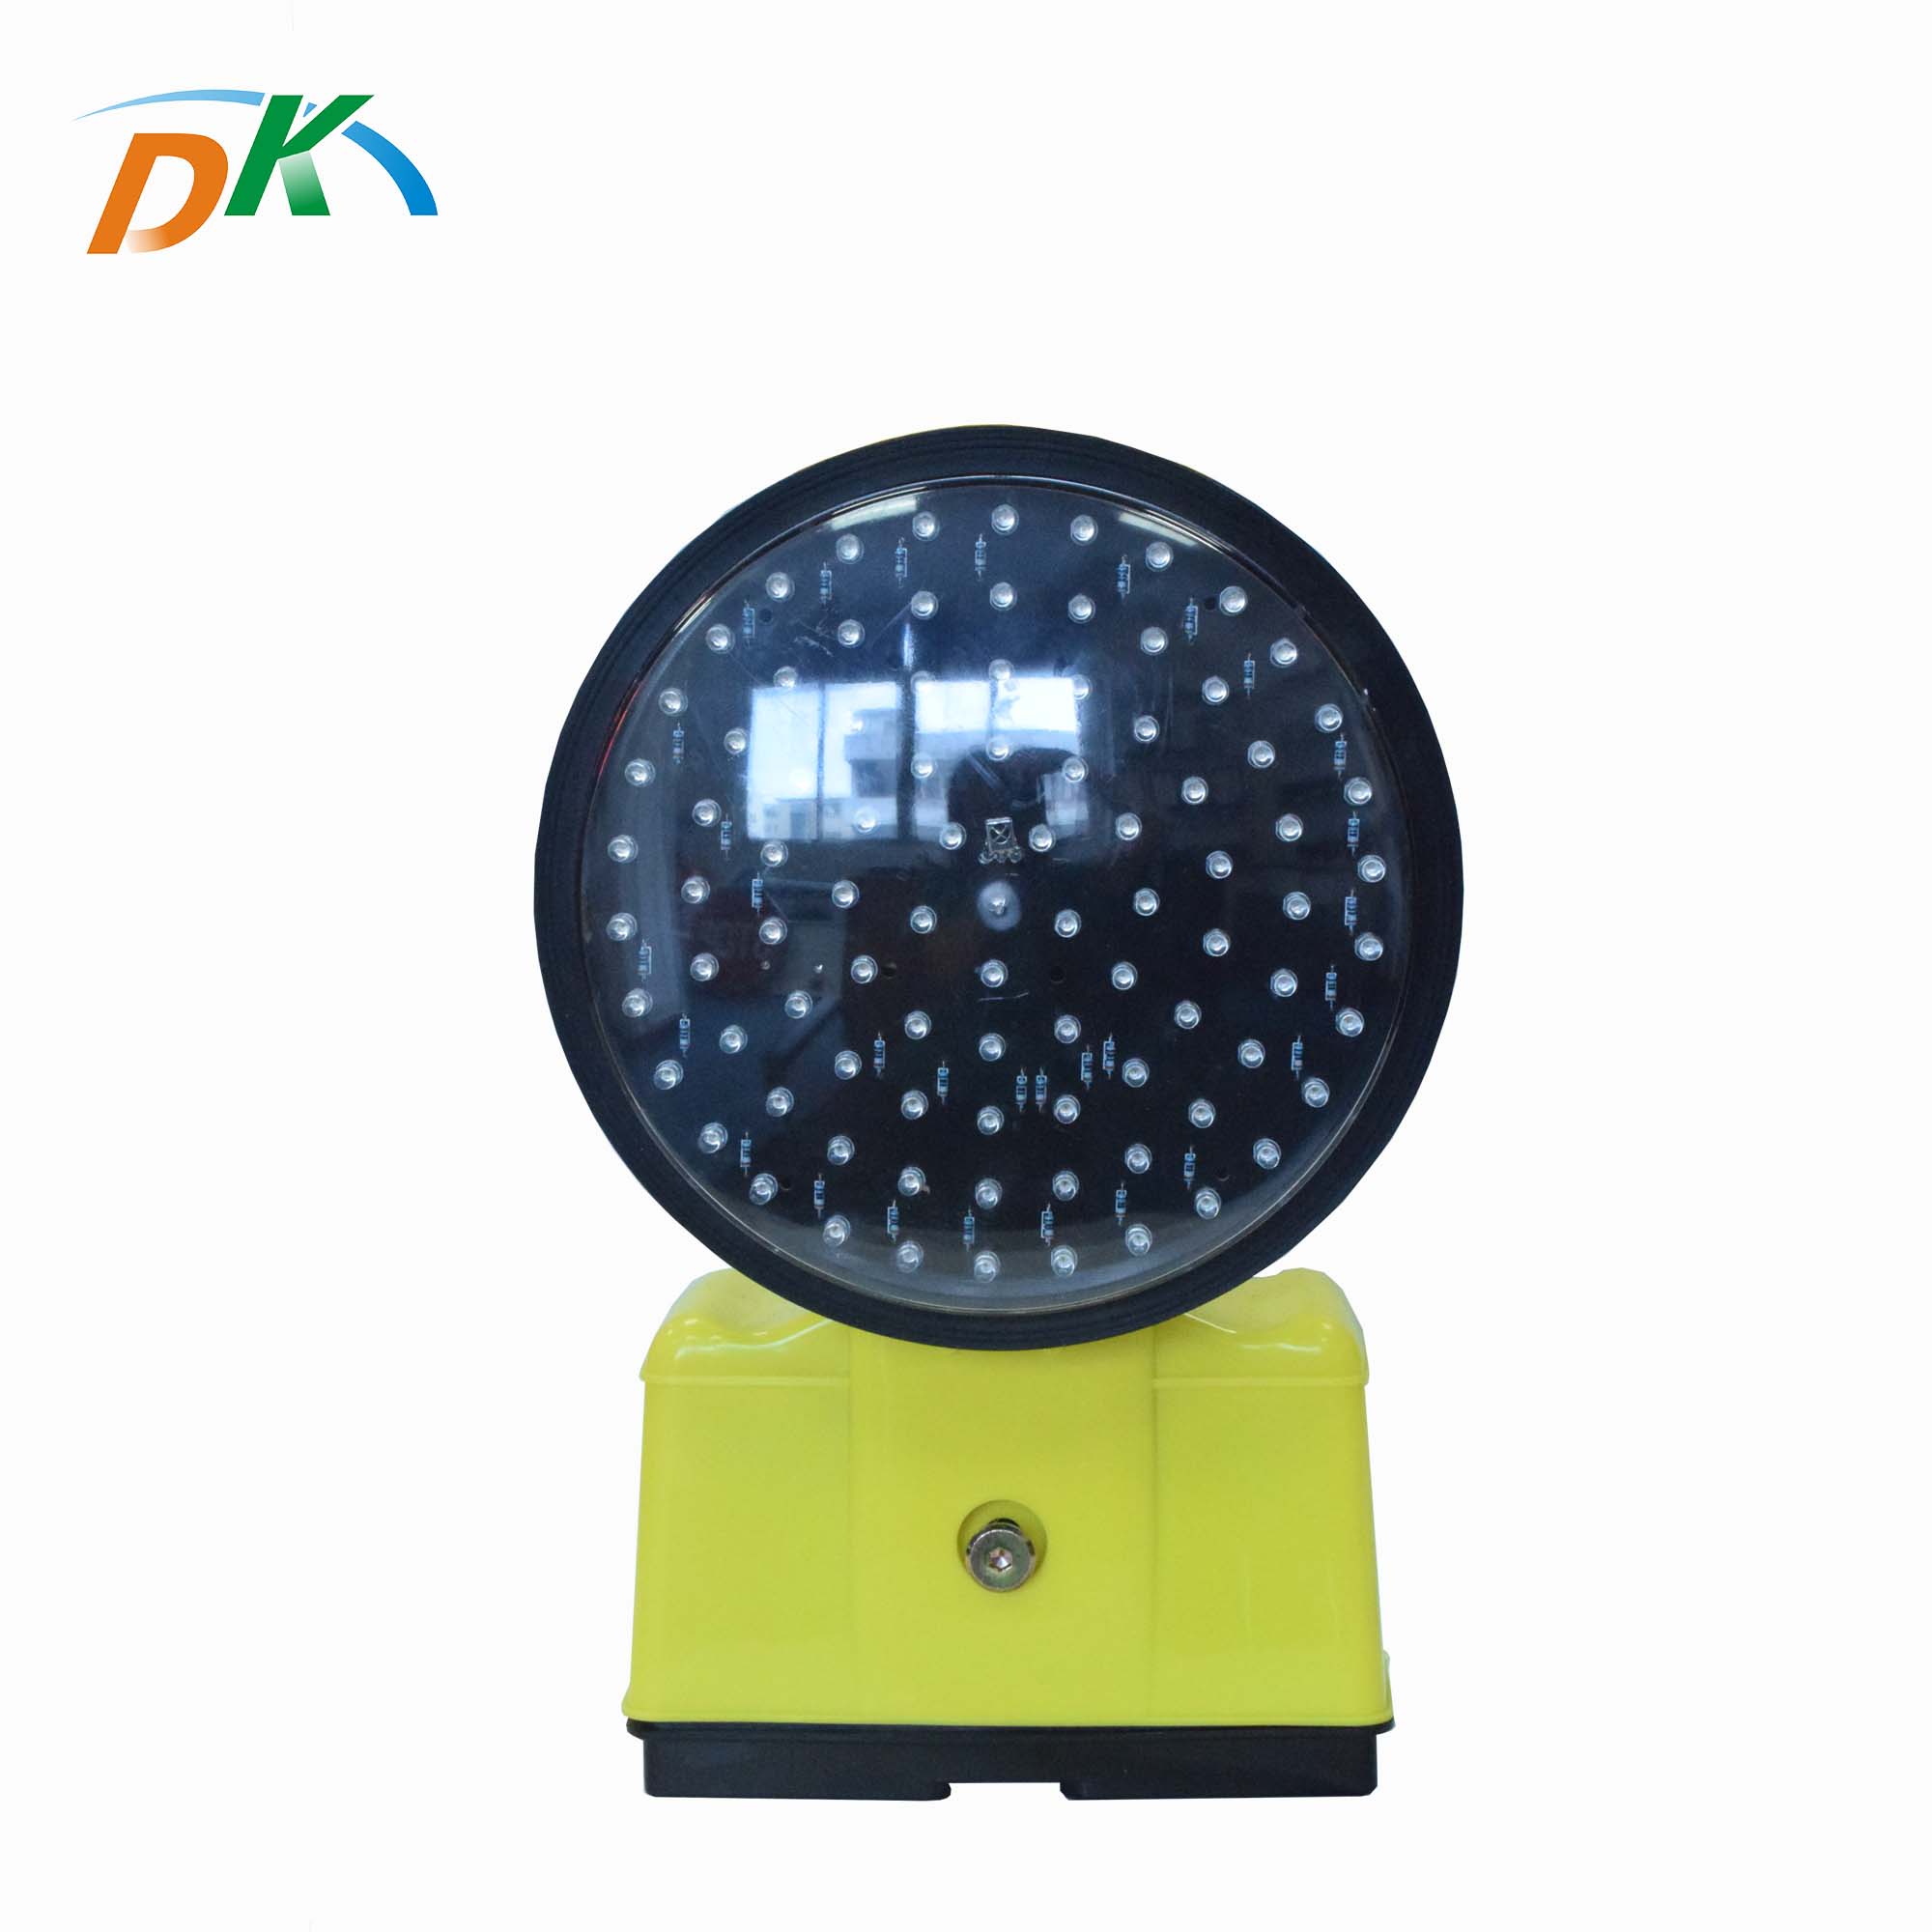 DK led warning flashing lamp in sequence and synchronous for roadway safety